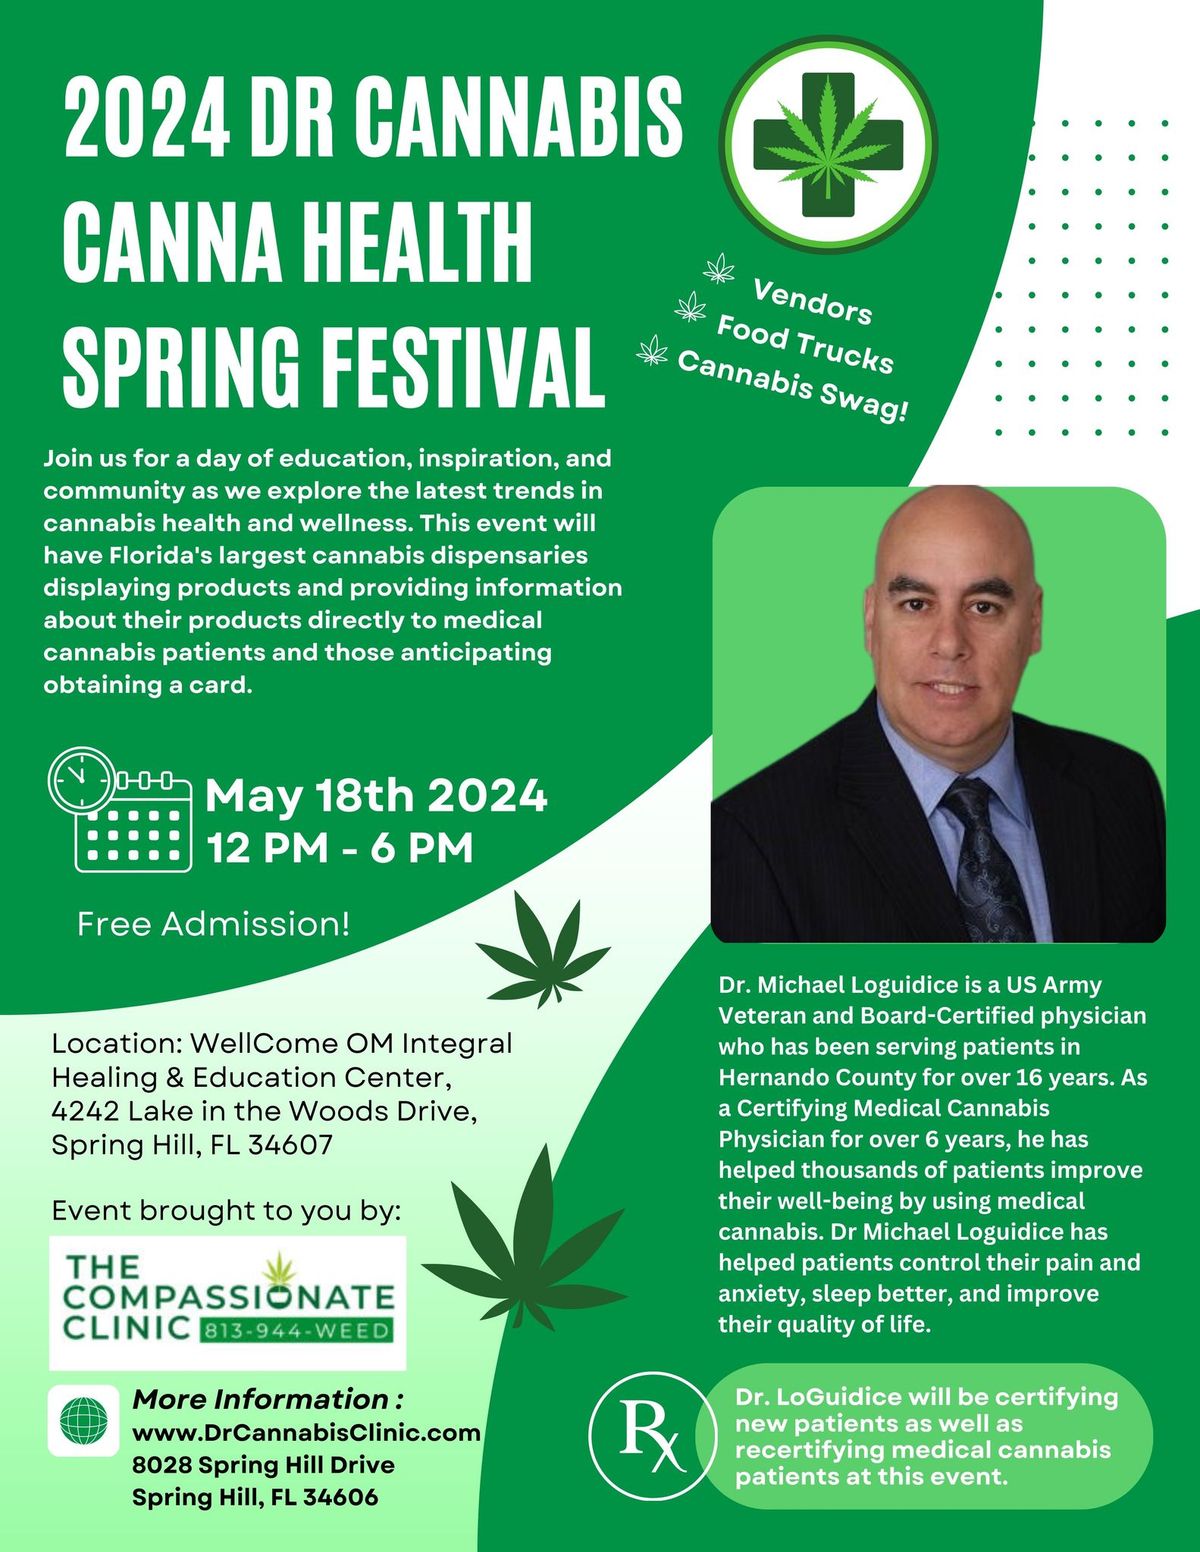 2024 Dr. Cannabis Spring Canna Health Festival Lecture Schedule